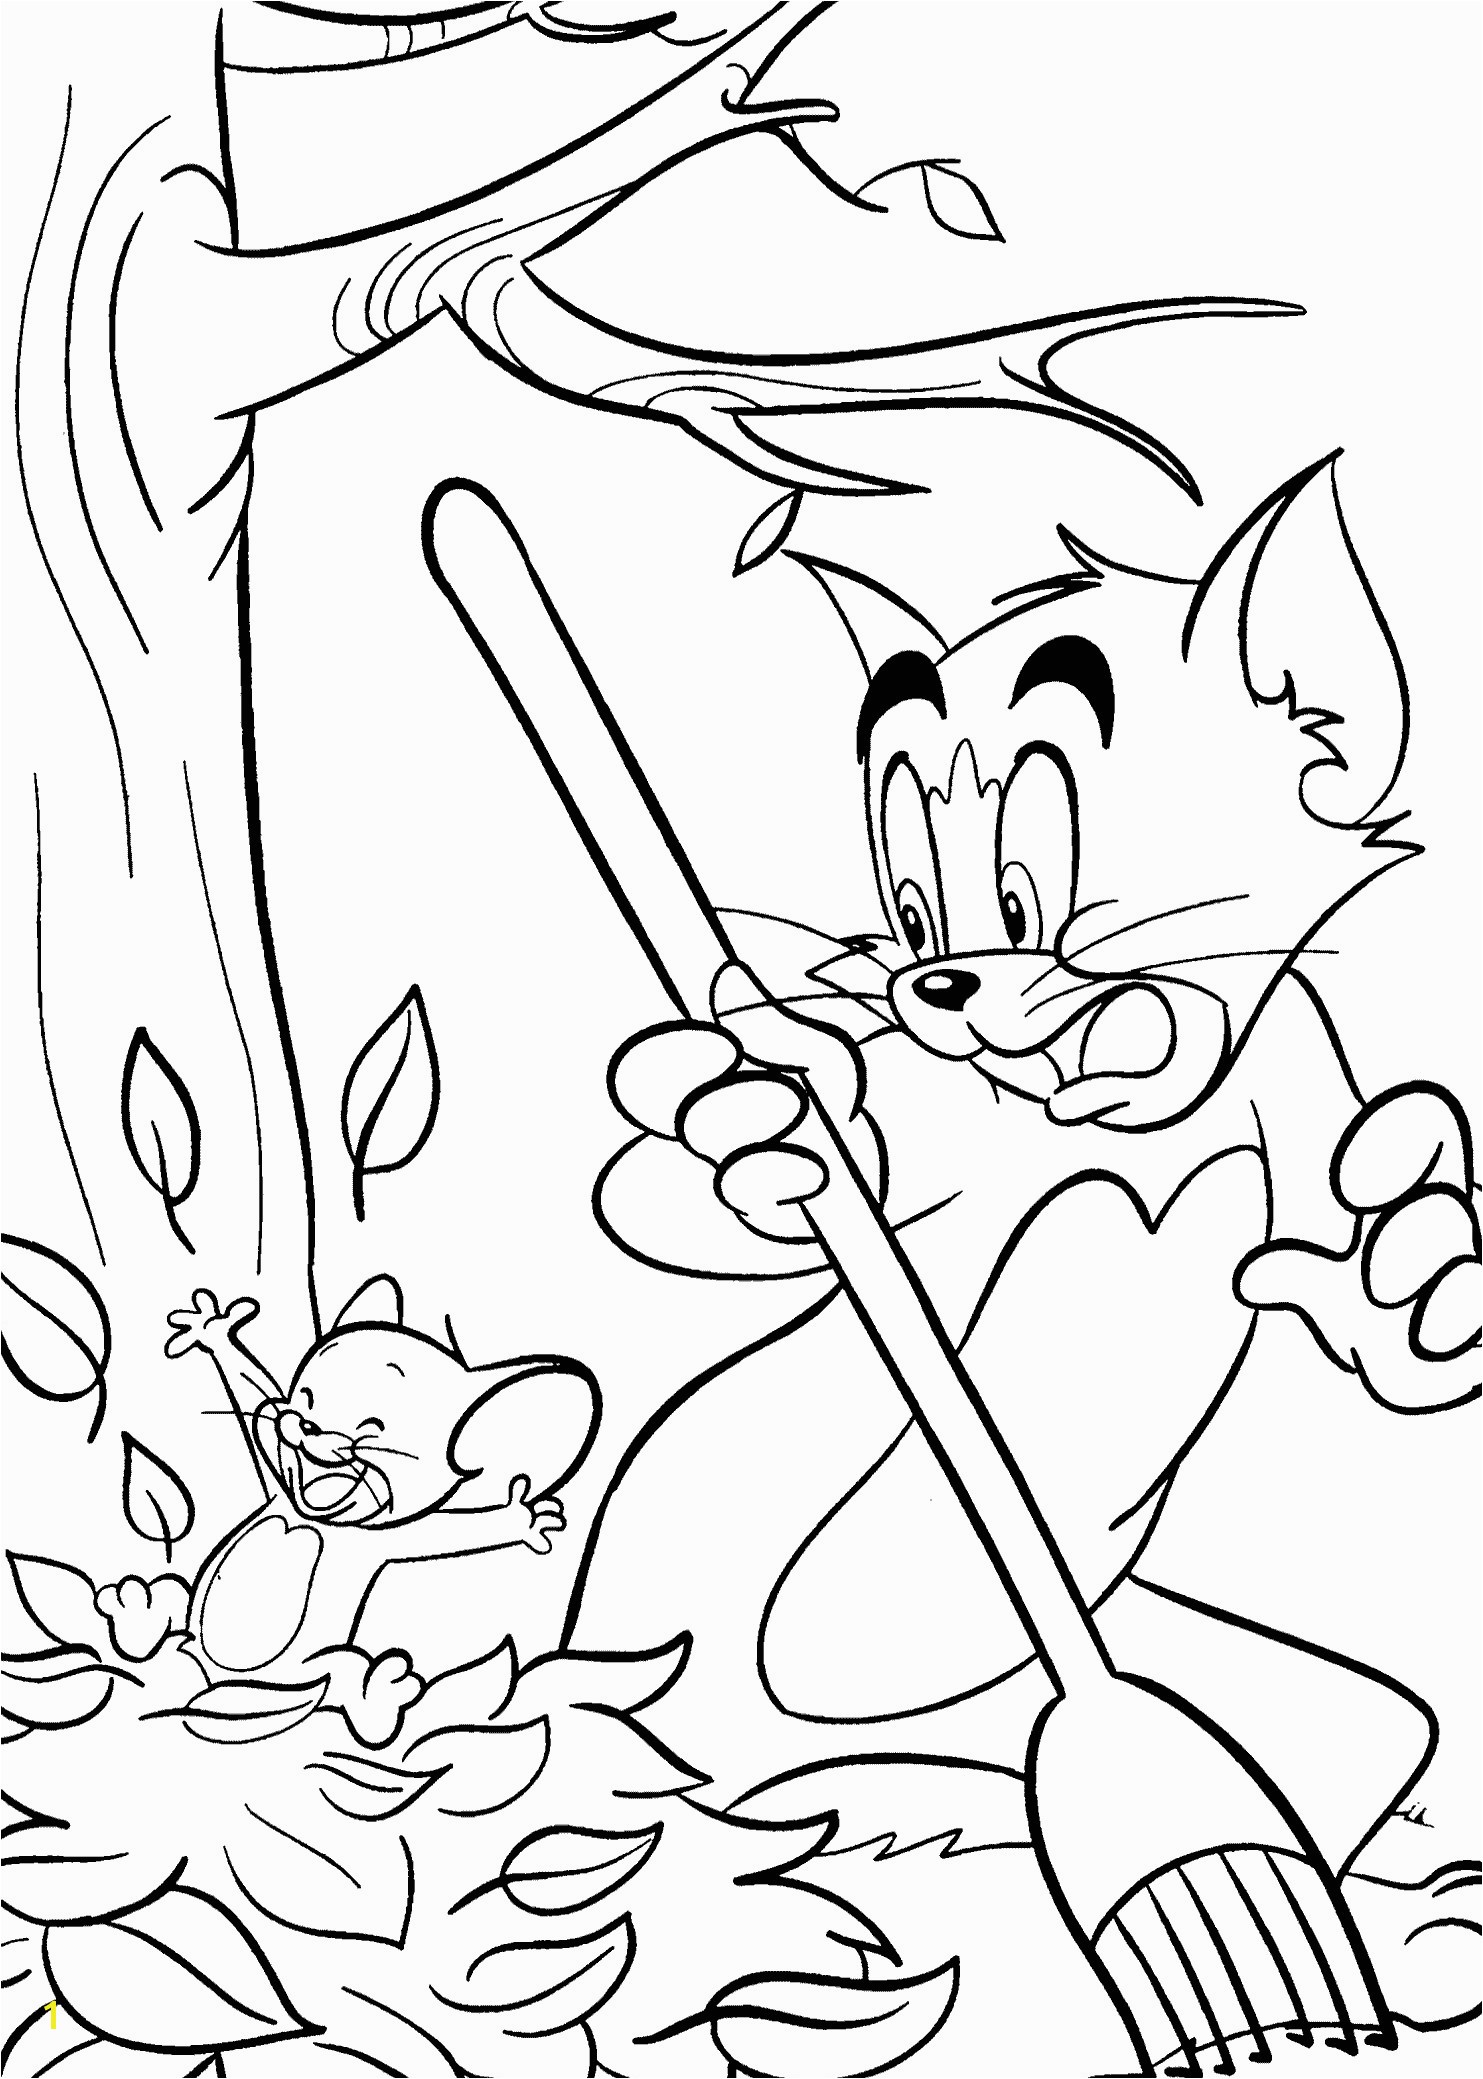 Paw Patrol Printable Coloring Pages Fresh Engaging Fall Coloring Pages Printable 26 Kids New 0d Page